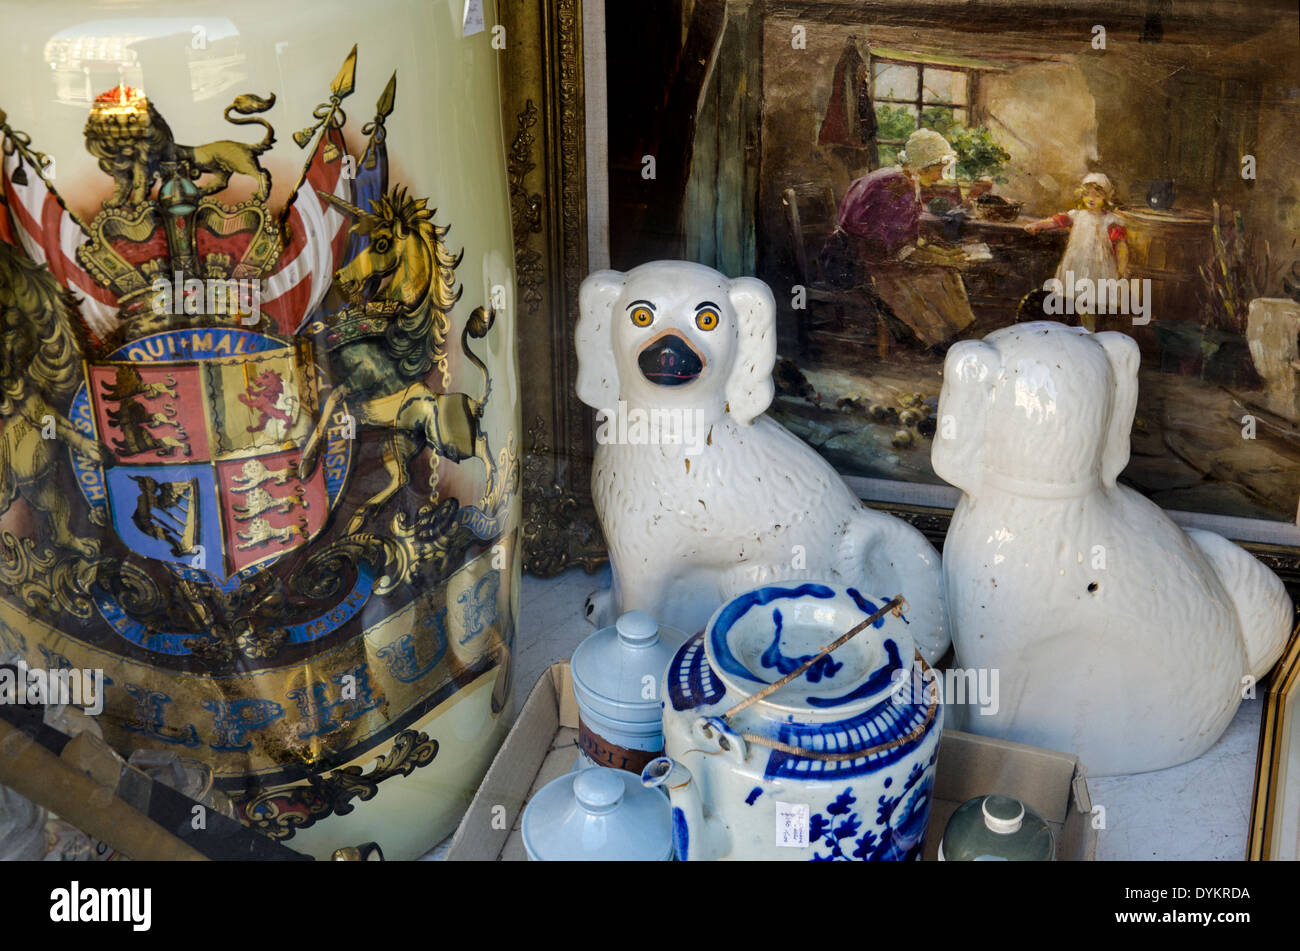 Bric-a-brac on display in the window of an antique shop in Edinburgh. Stock Photo